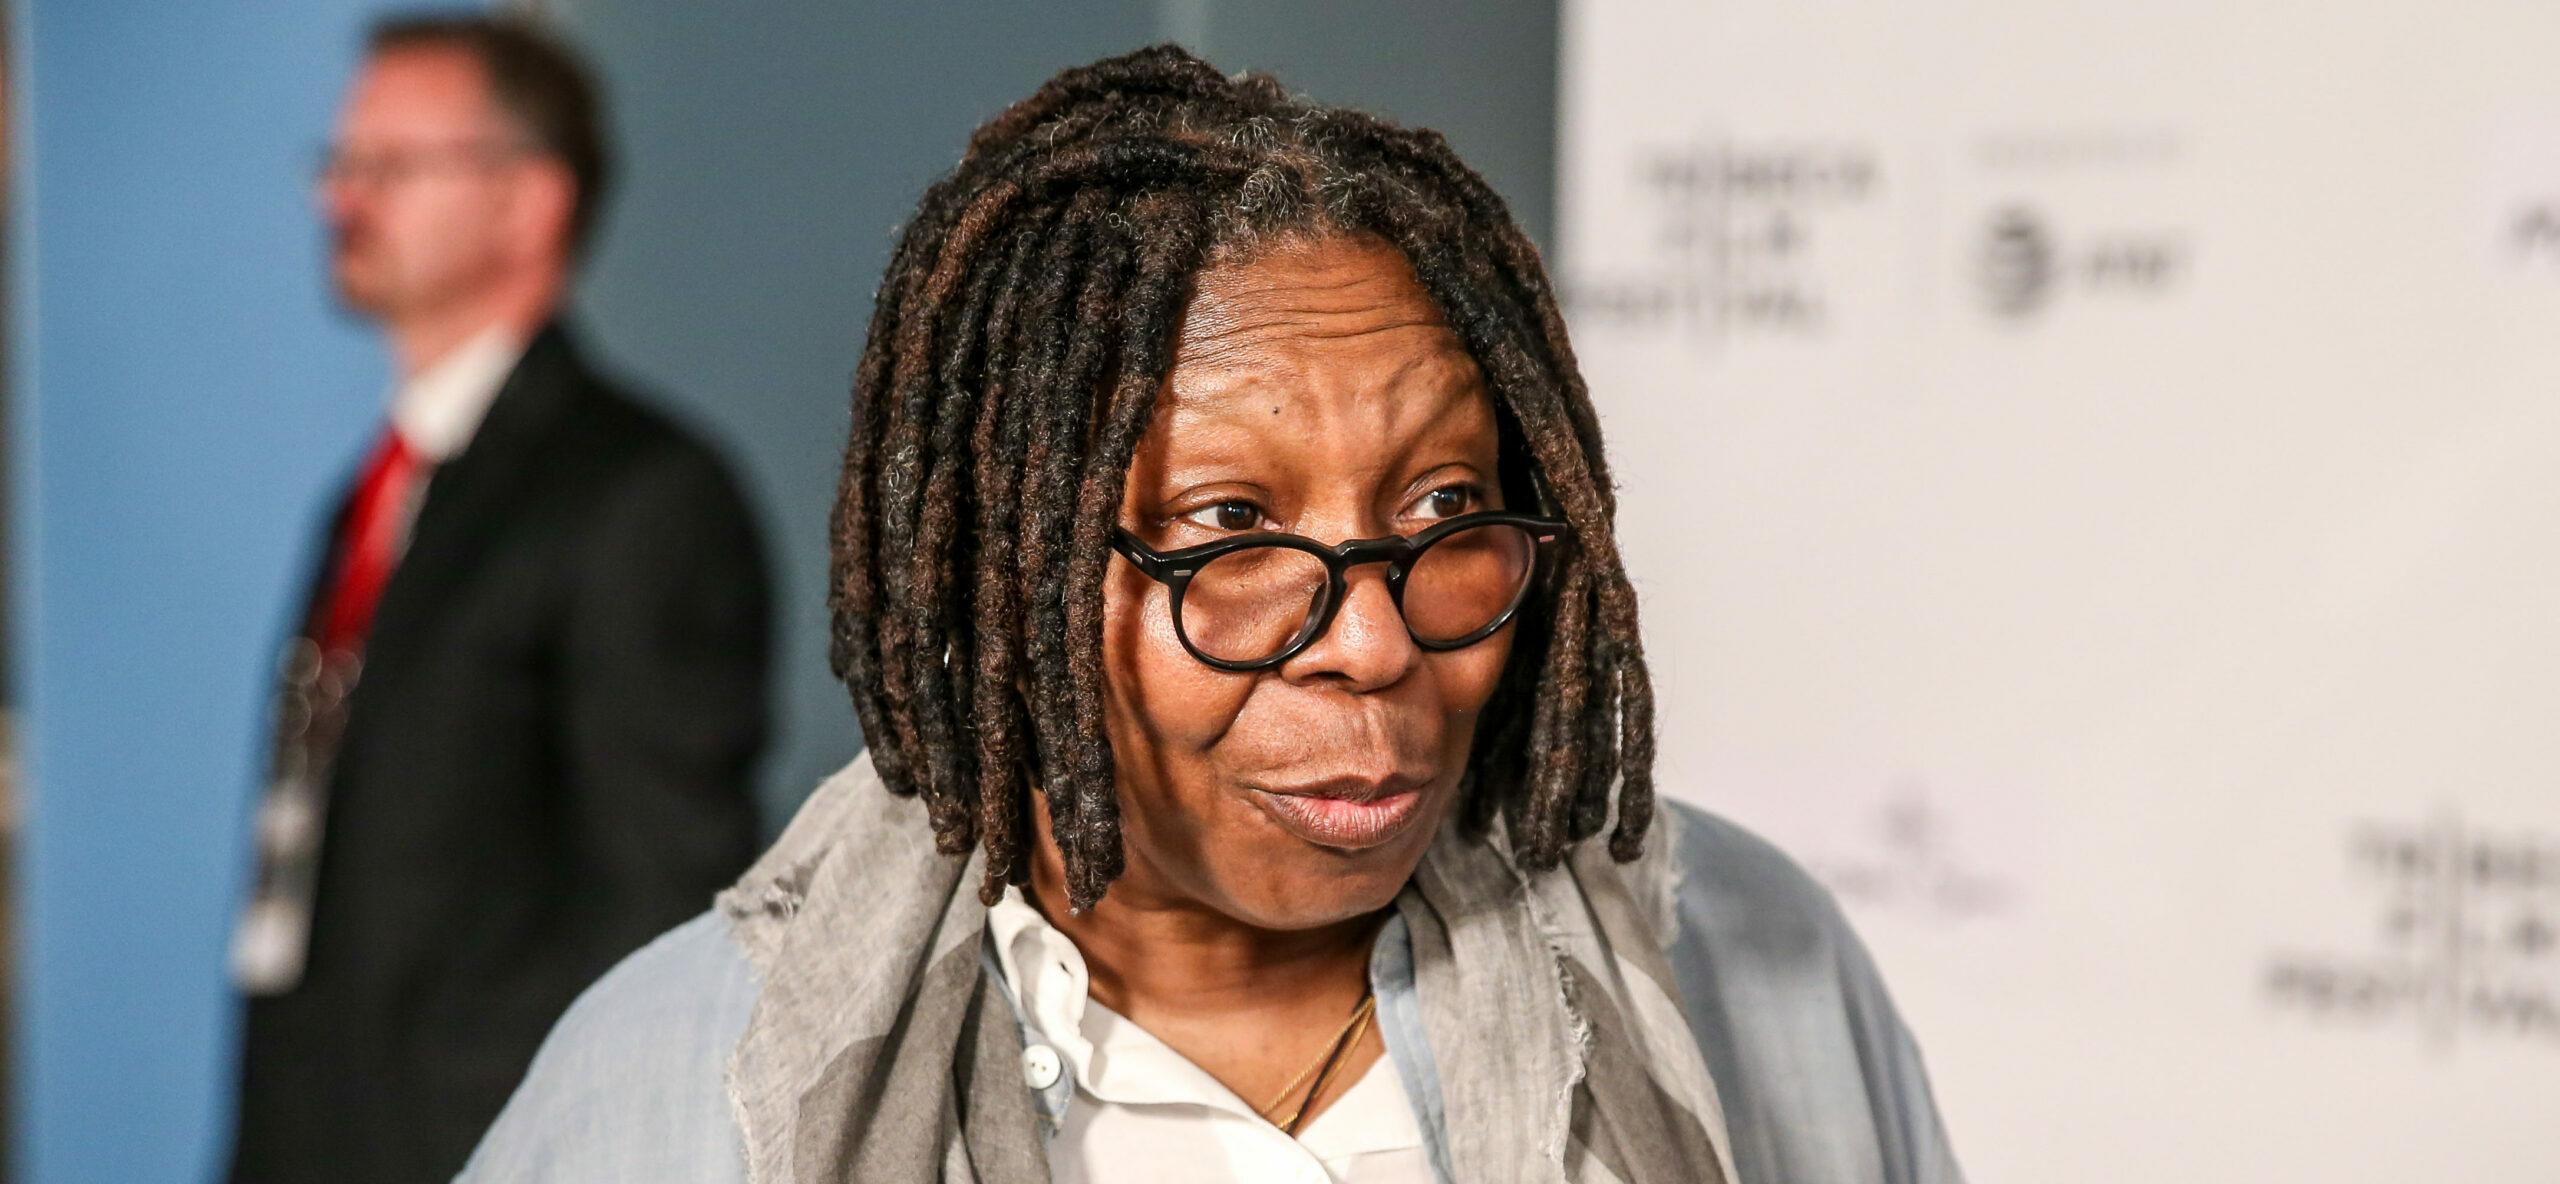 Whoopi Goldberg Reacts To Joy Behar Being ‘Happy’ Over ‘The View’ Firing